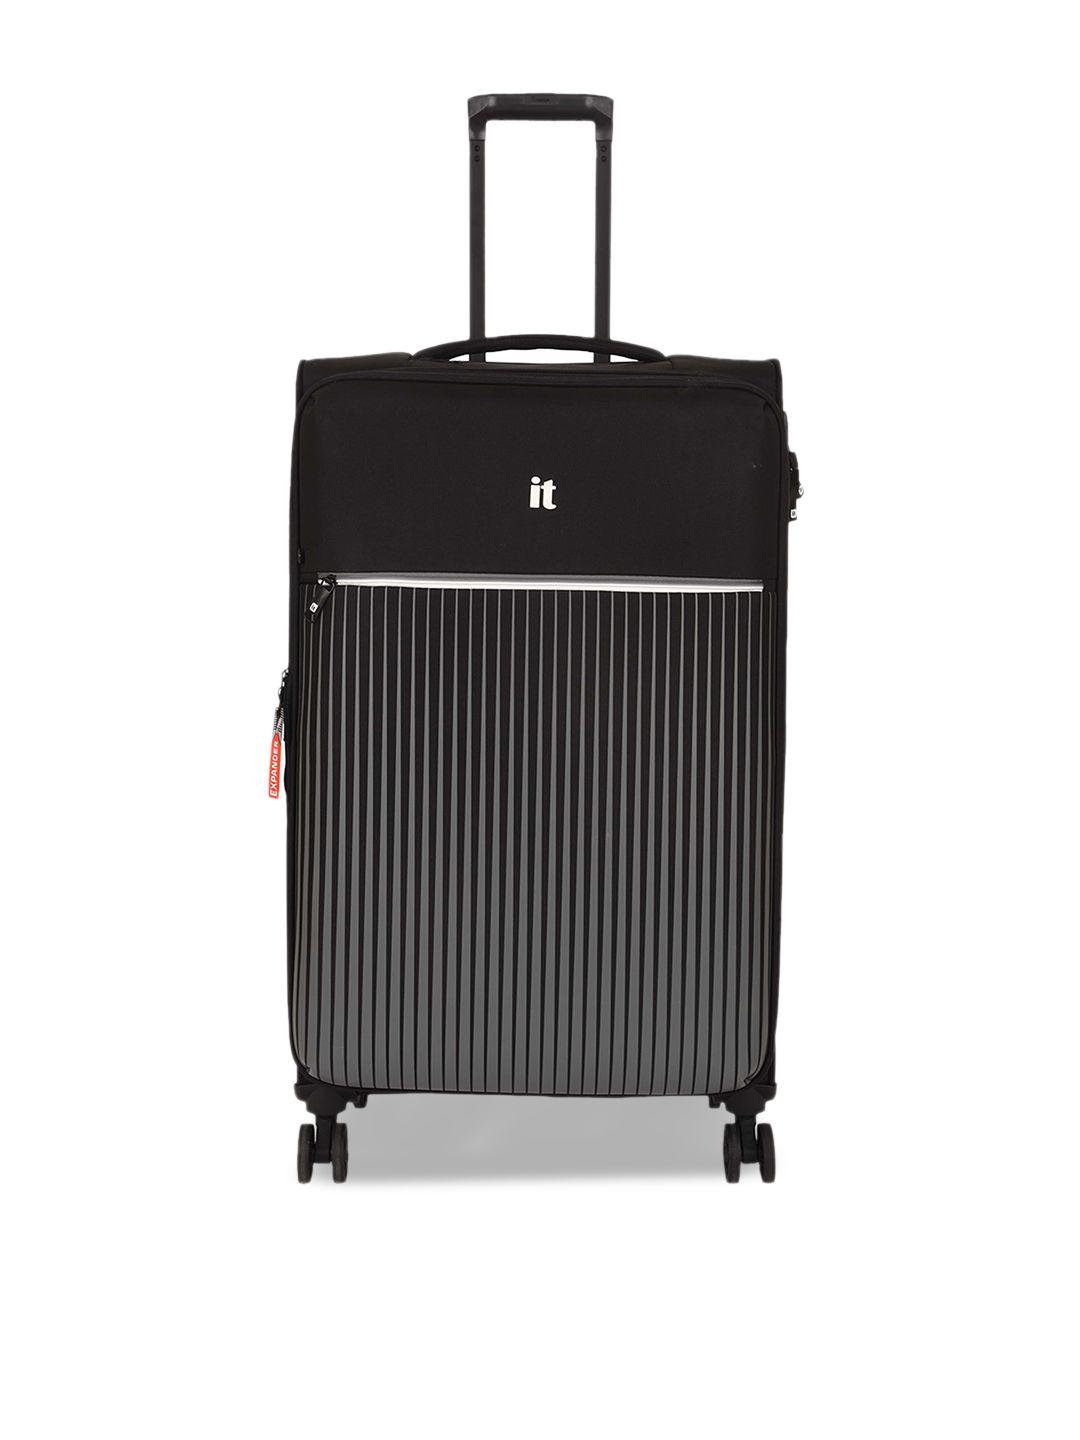 it luggage the lite striped soft-sided trolley bag